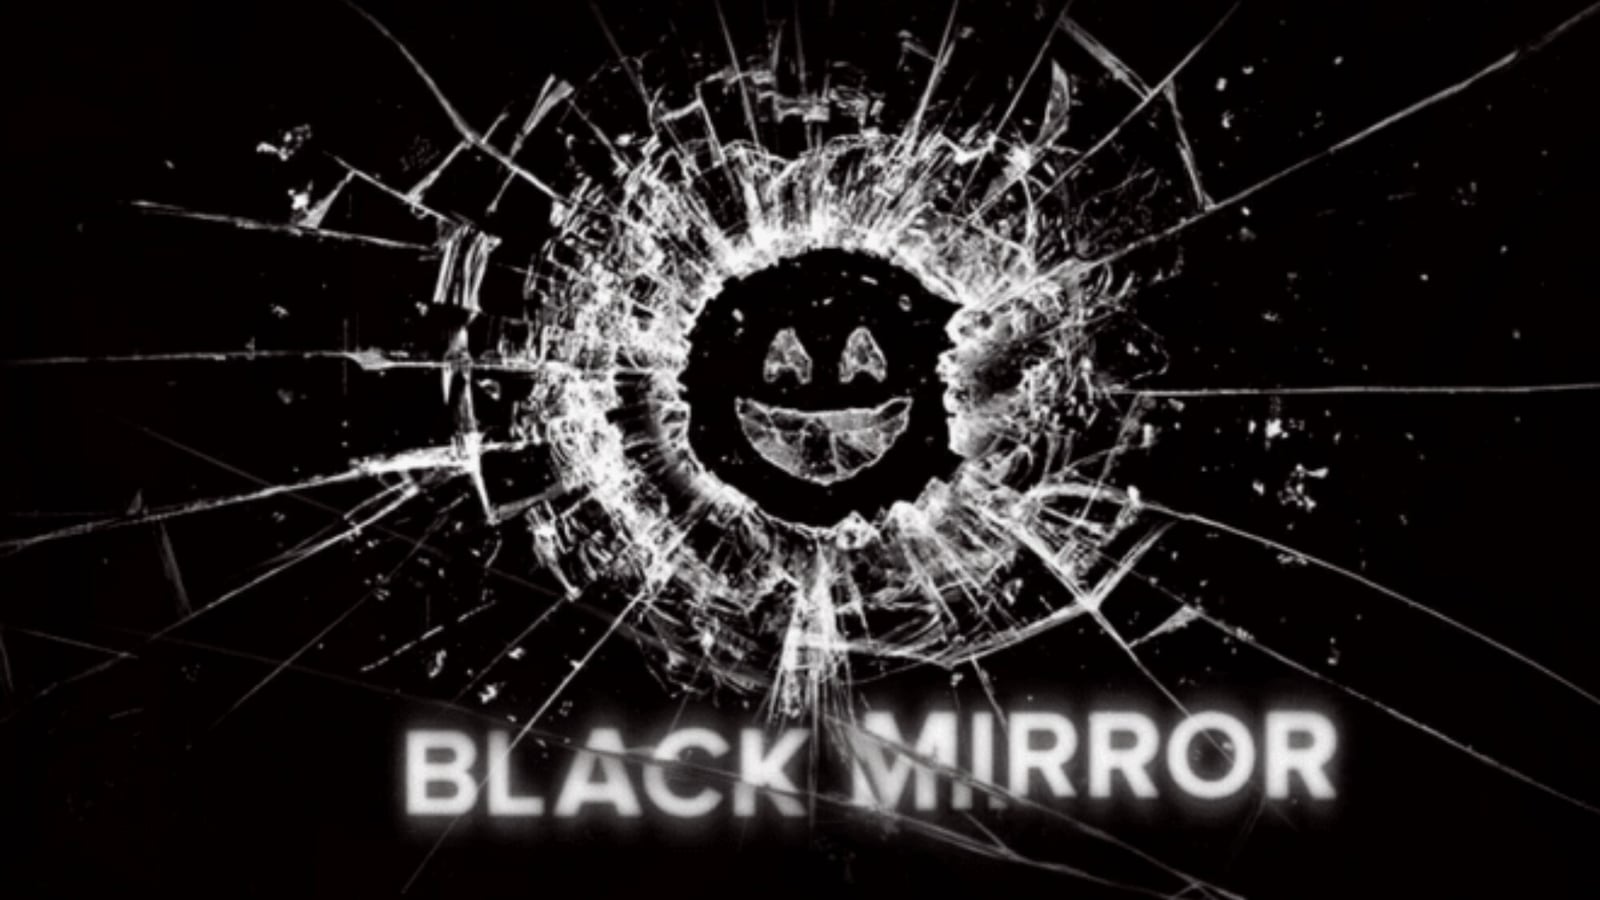 Netflix's Black Mirror to return with Season 6, fans say 'just can